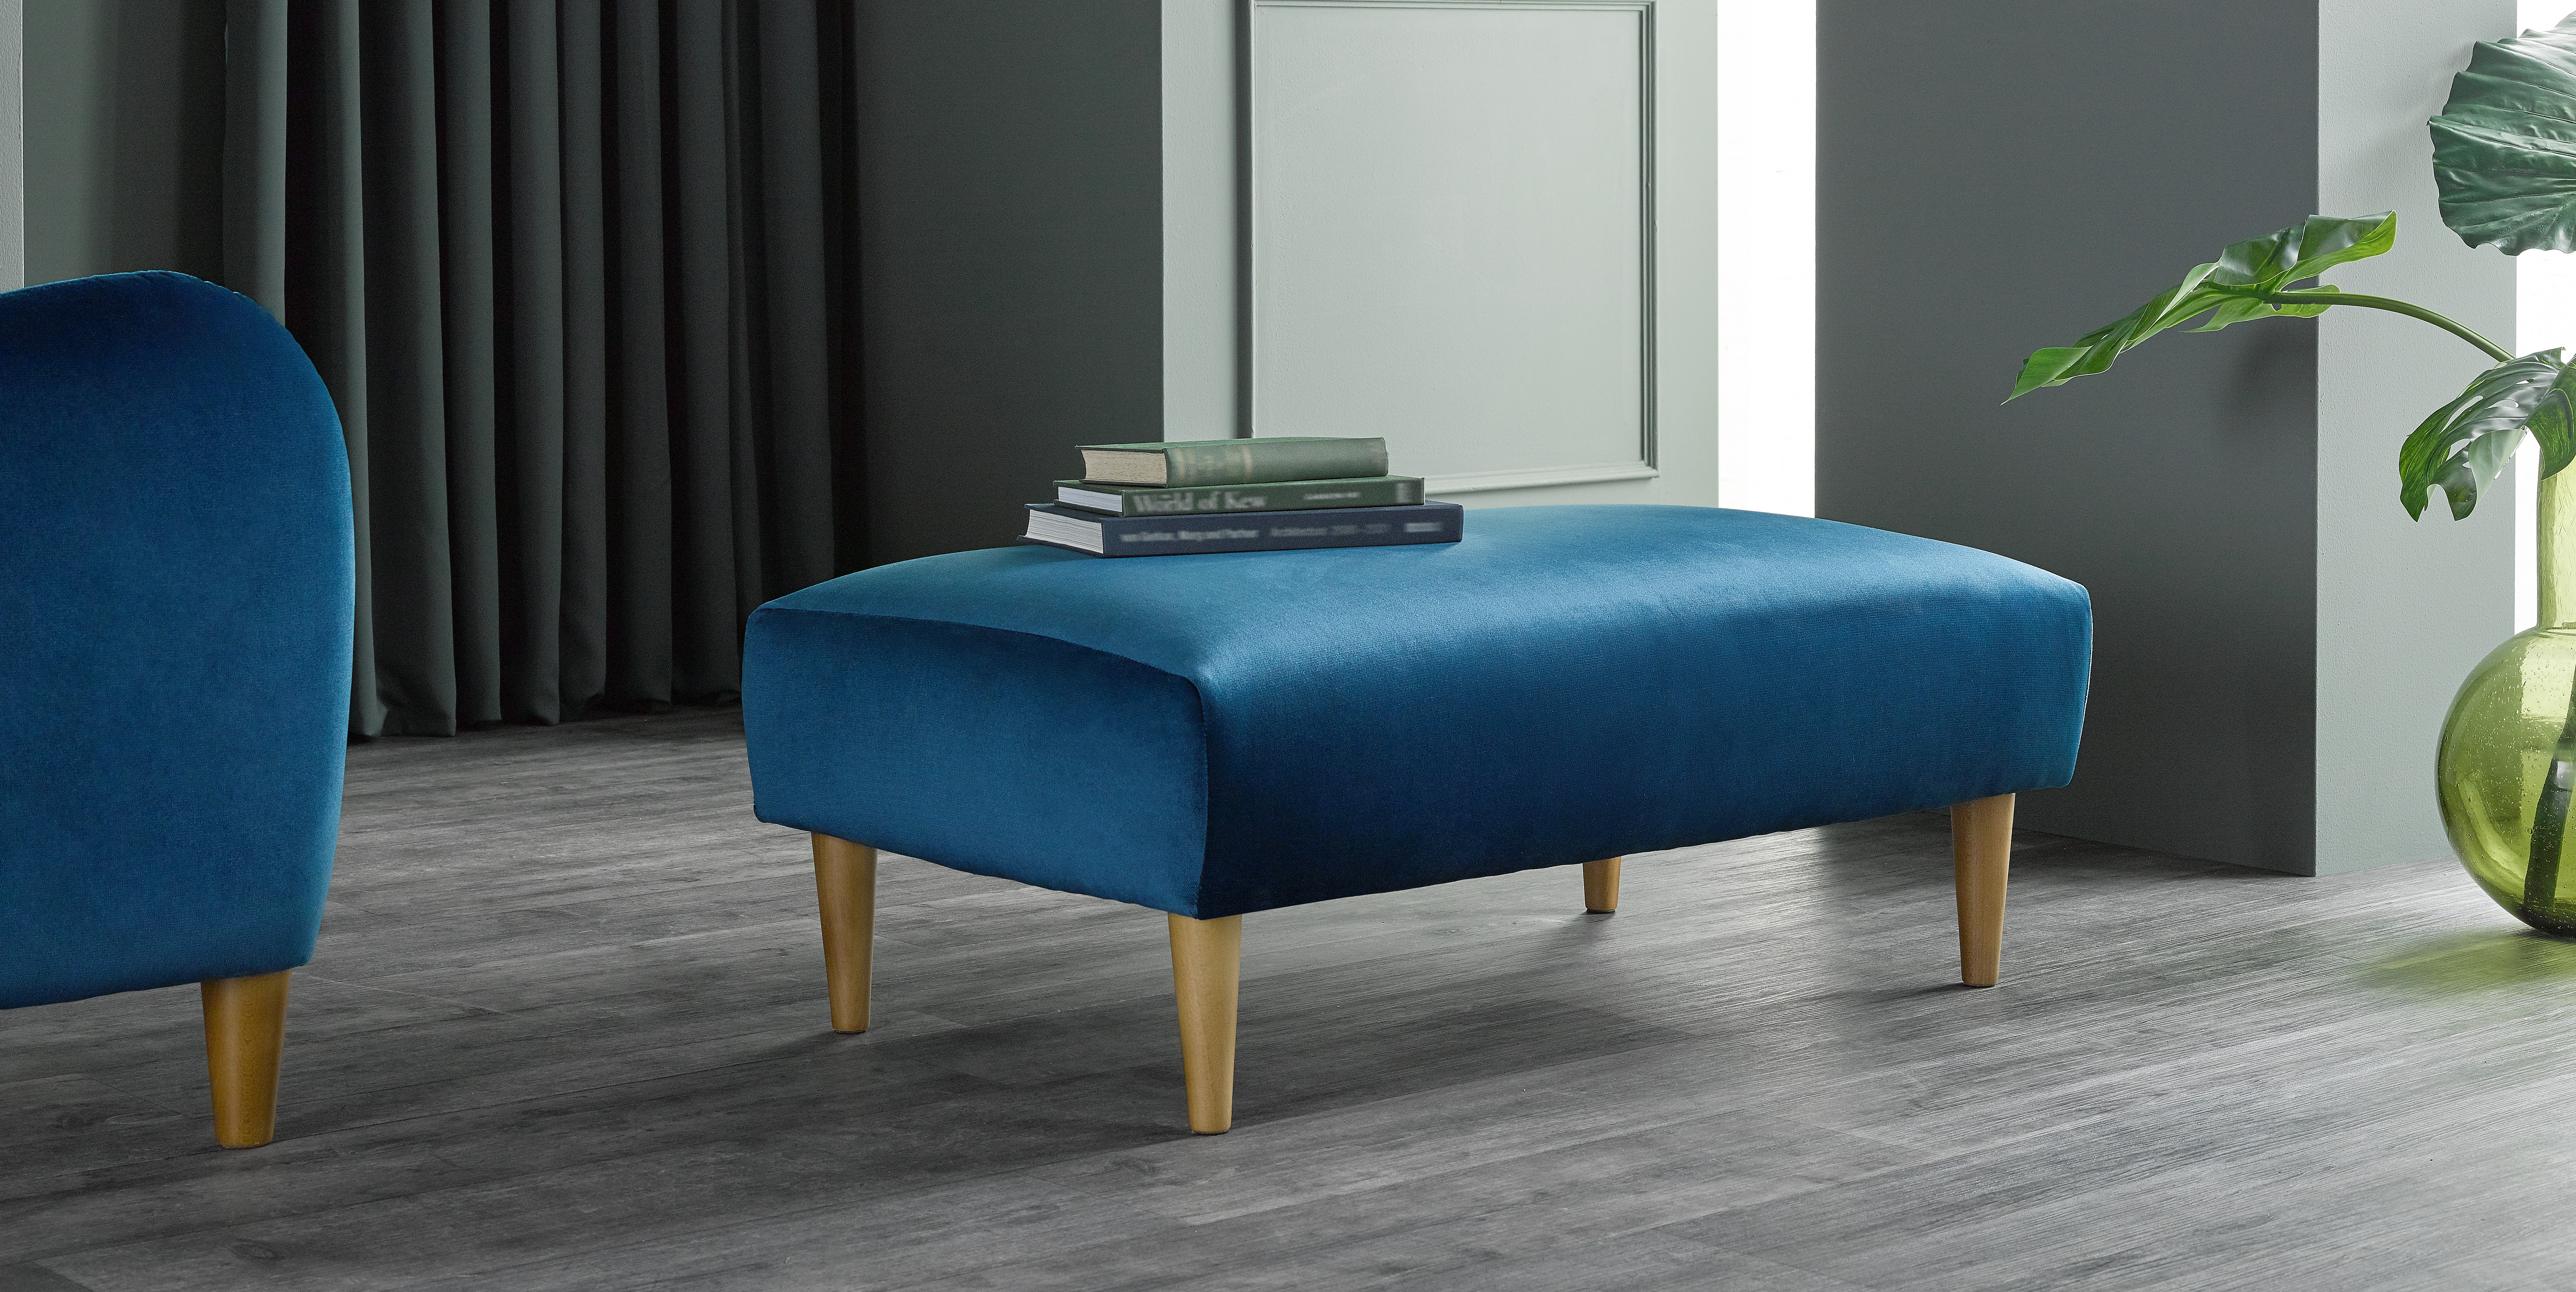 How to choose your perfect footstool